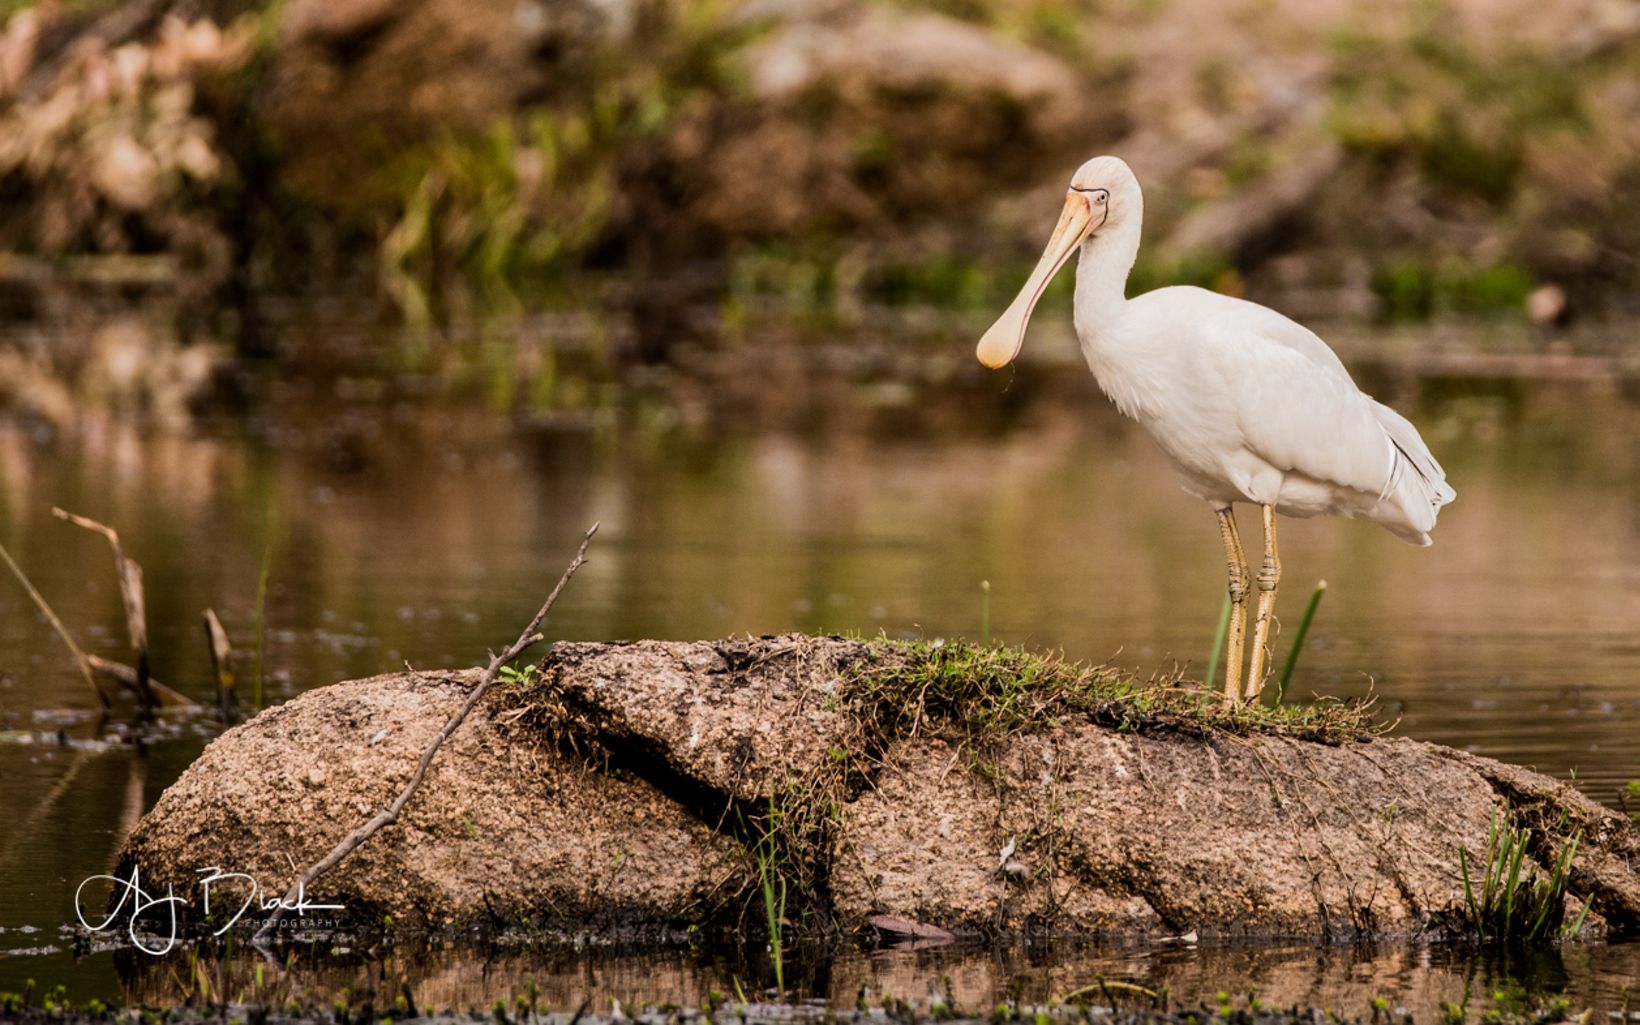 common in southeast Australia. The bill of the yellow-billed spoonbill works like forceps to catch prey